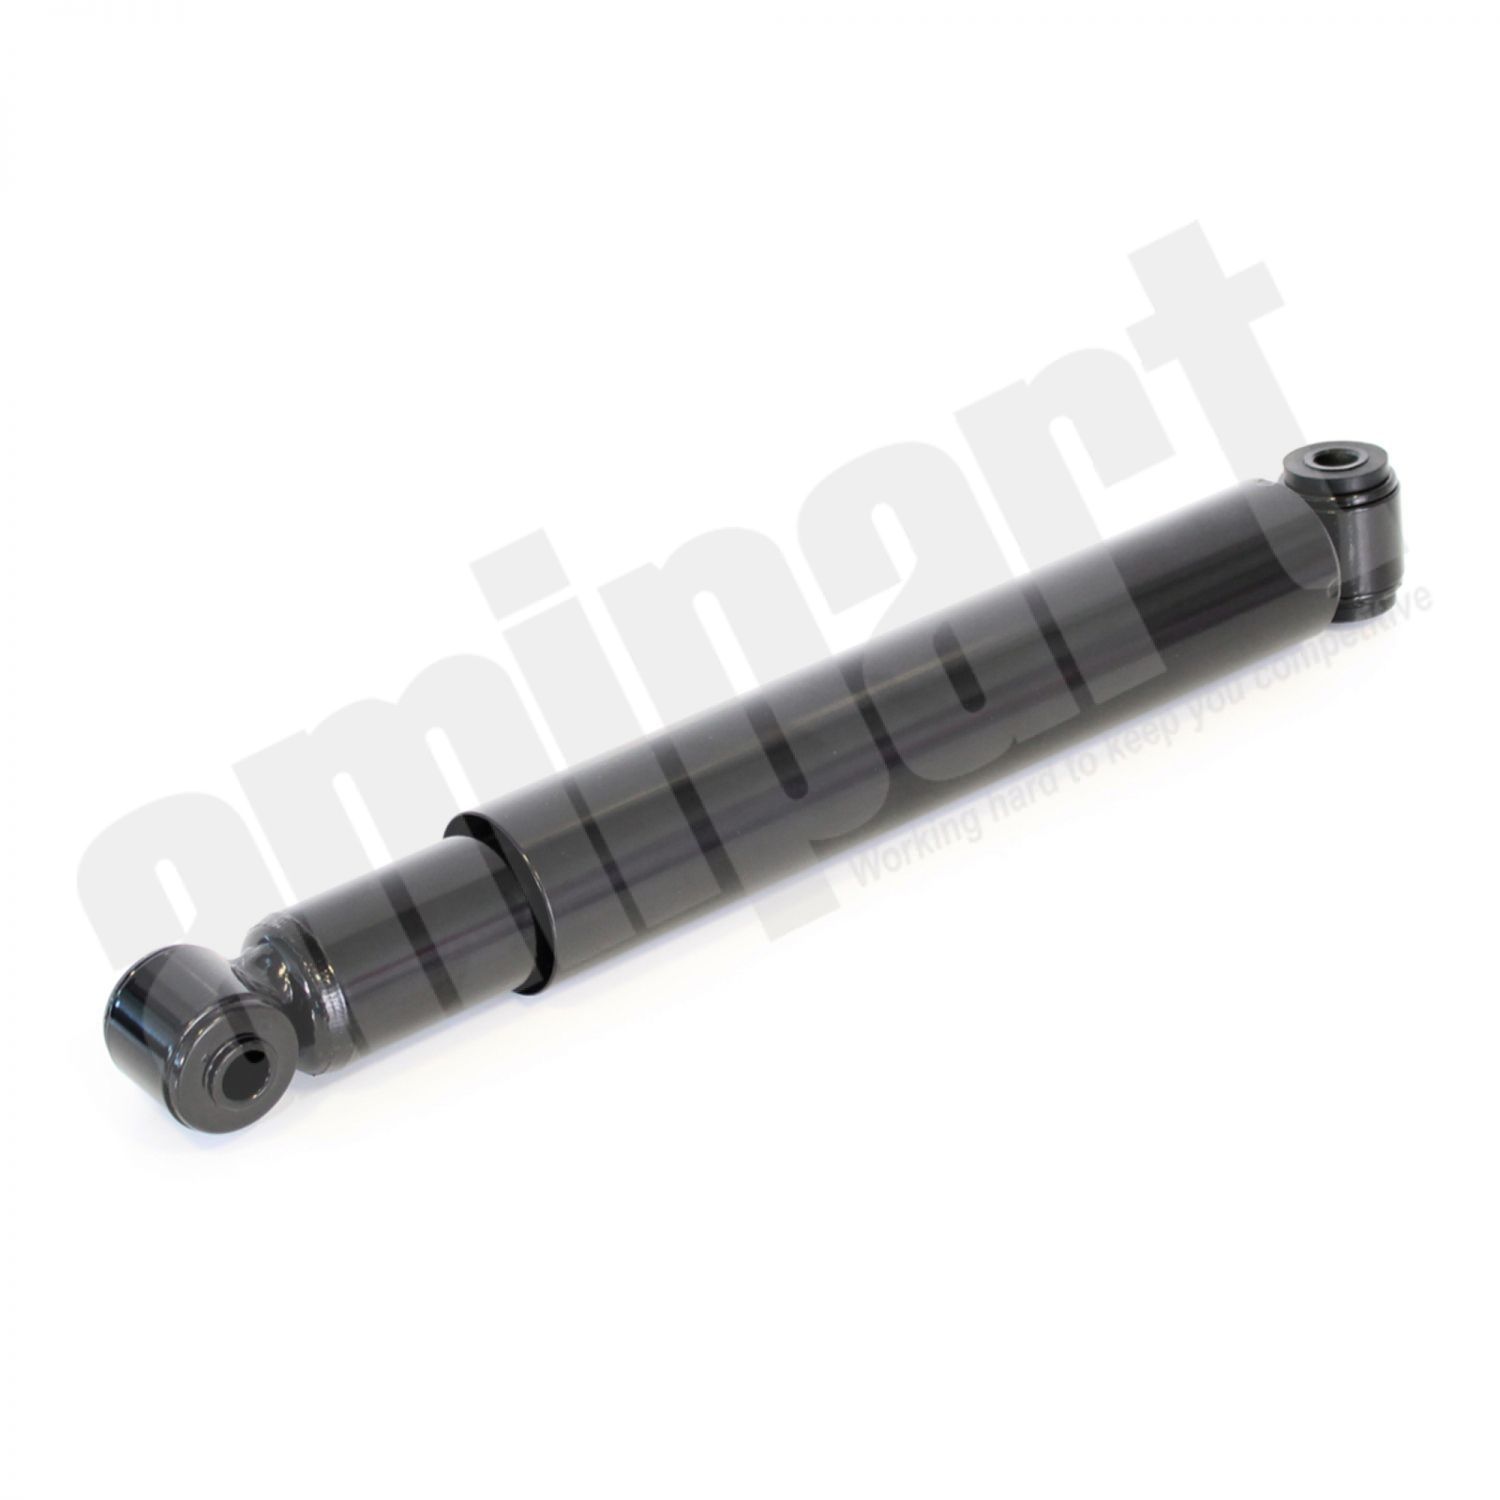 Amipart - SAF AXLE TRAILER SHOCK ABSORBER